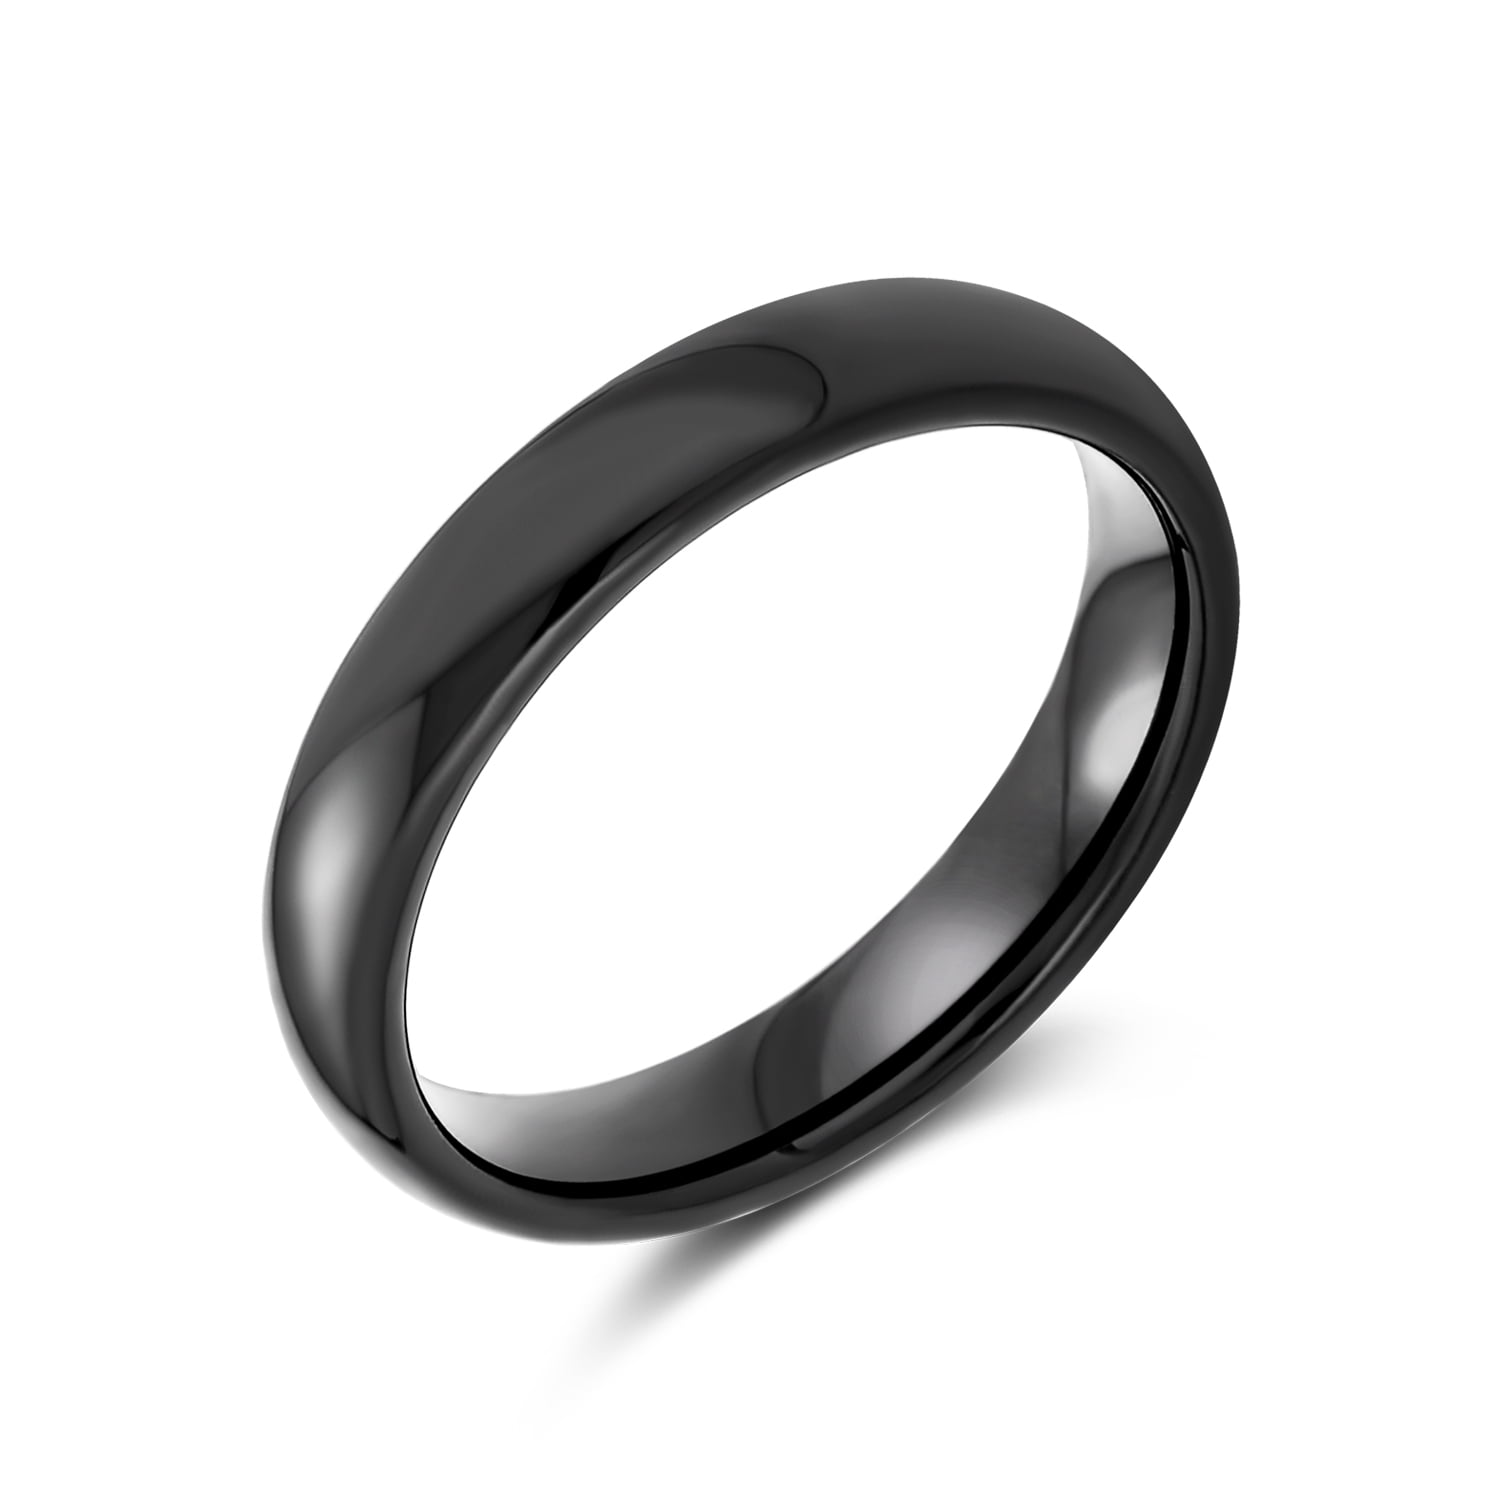 Basic Plain Simple Dome Couples Classic Black Rose Gold Plated Titanium 4MM Wedding Band Ring for Men Women Comfort Fit